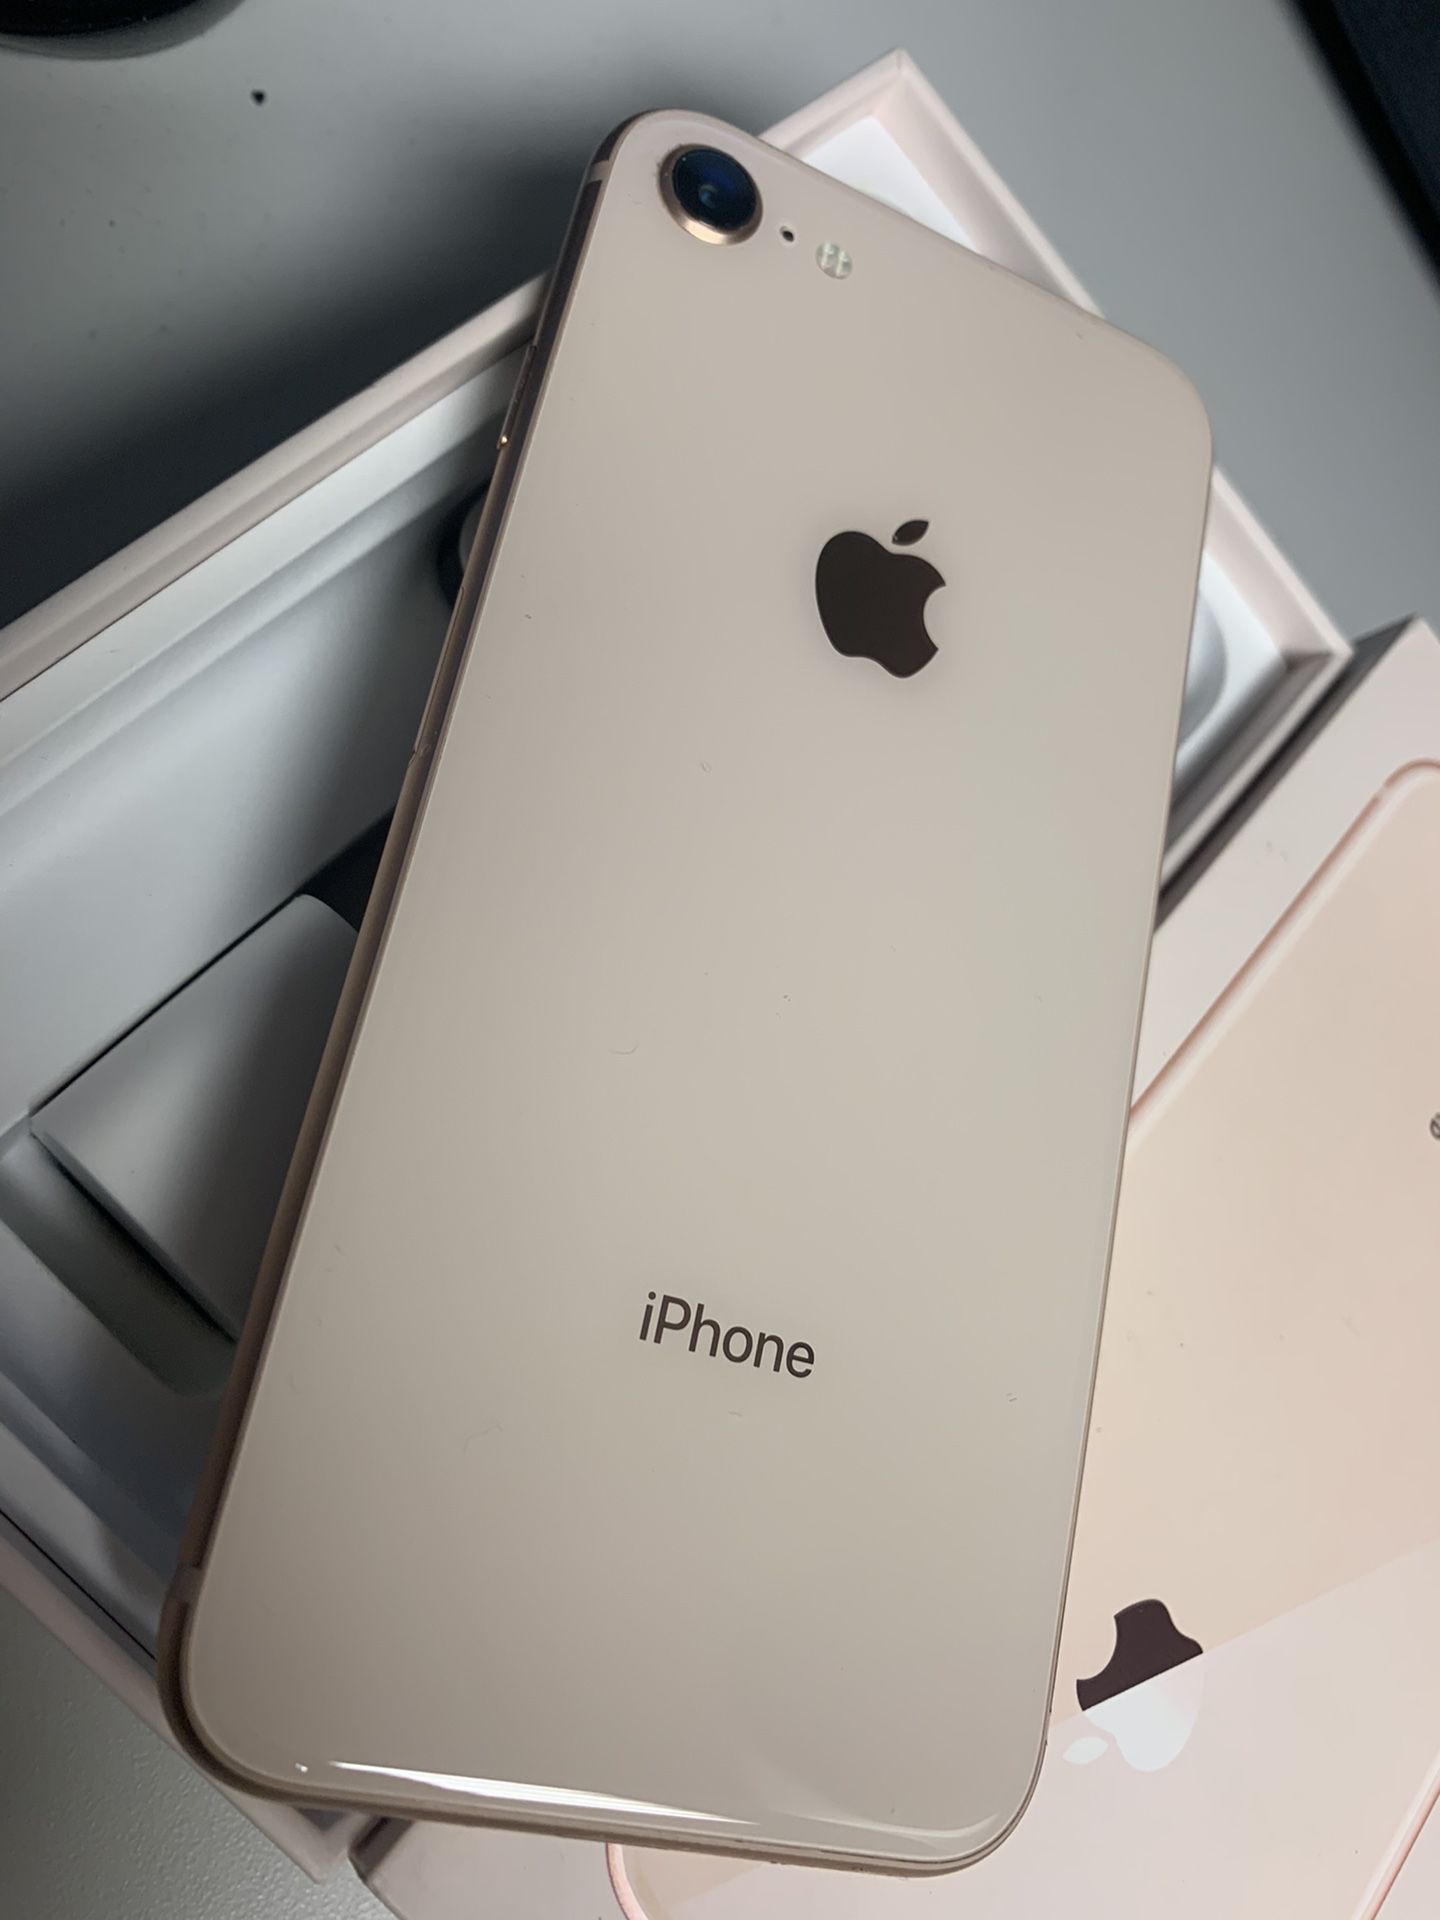 AT&T, Rose Gold, 64GB, Apple iPhone 8, New Condition